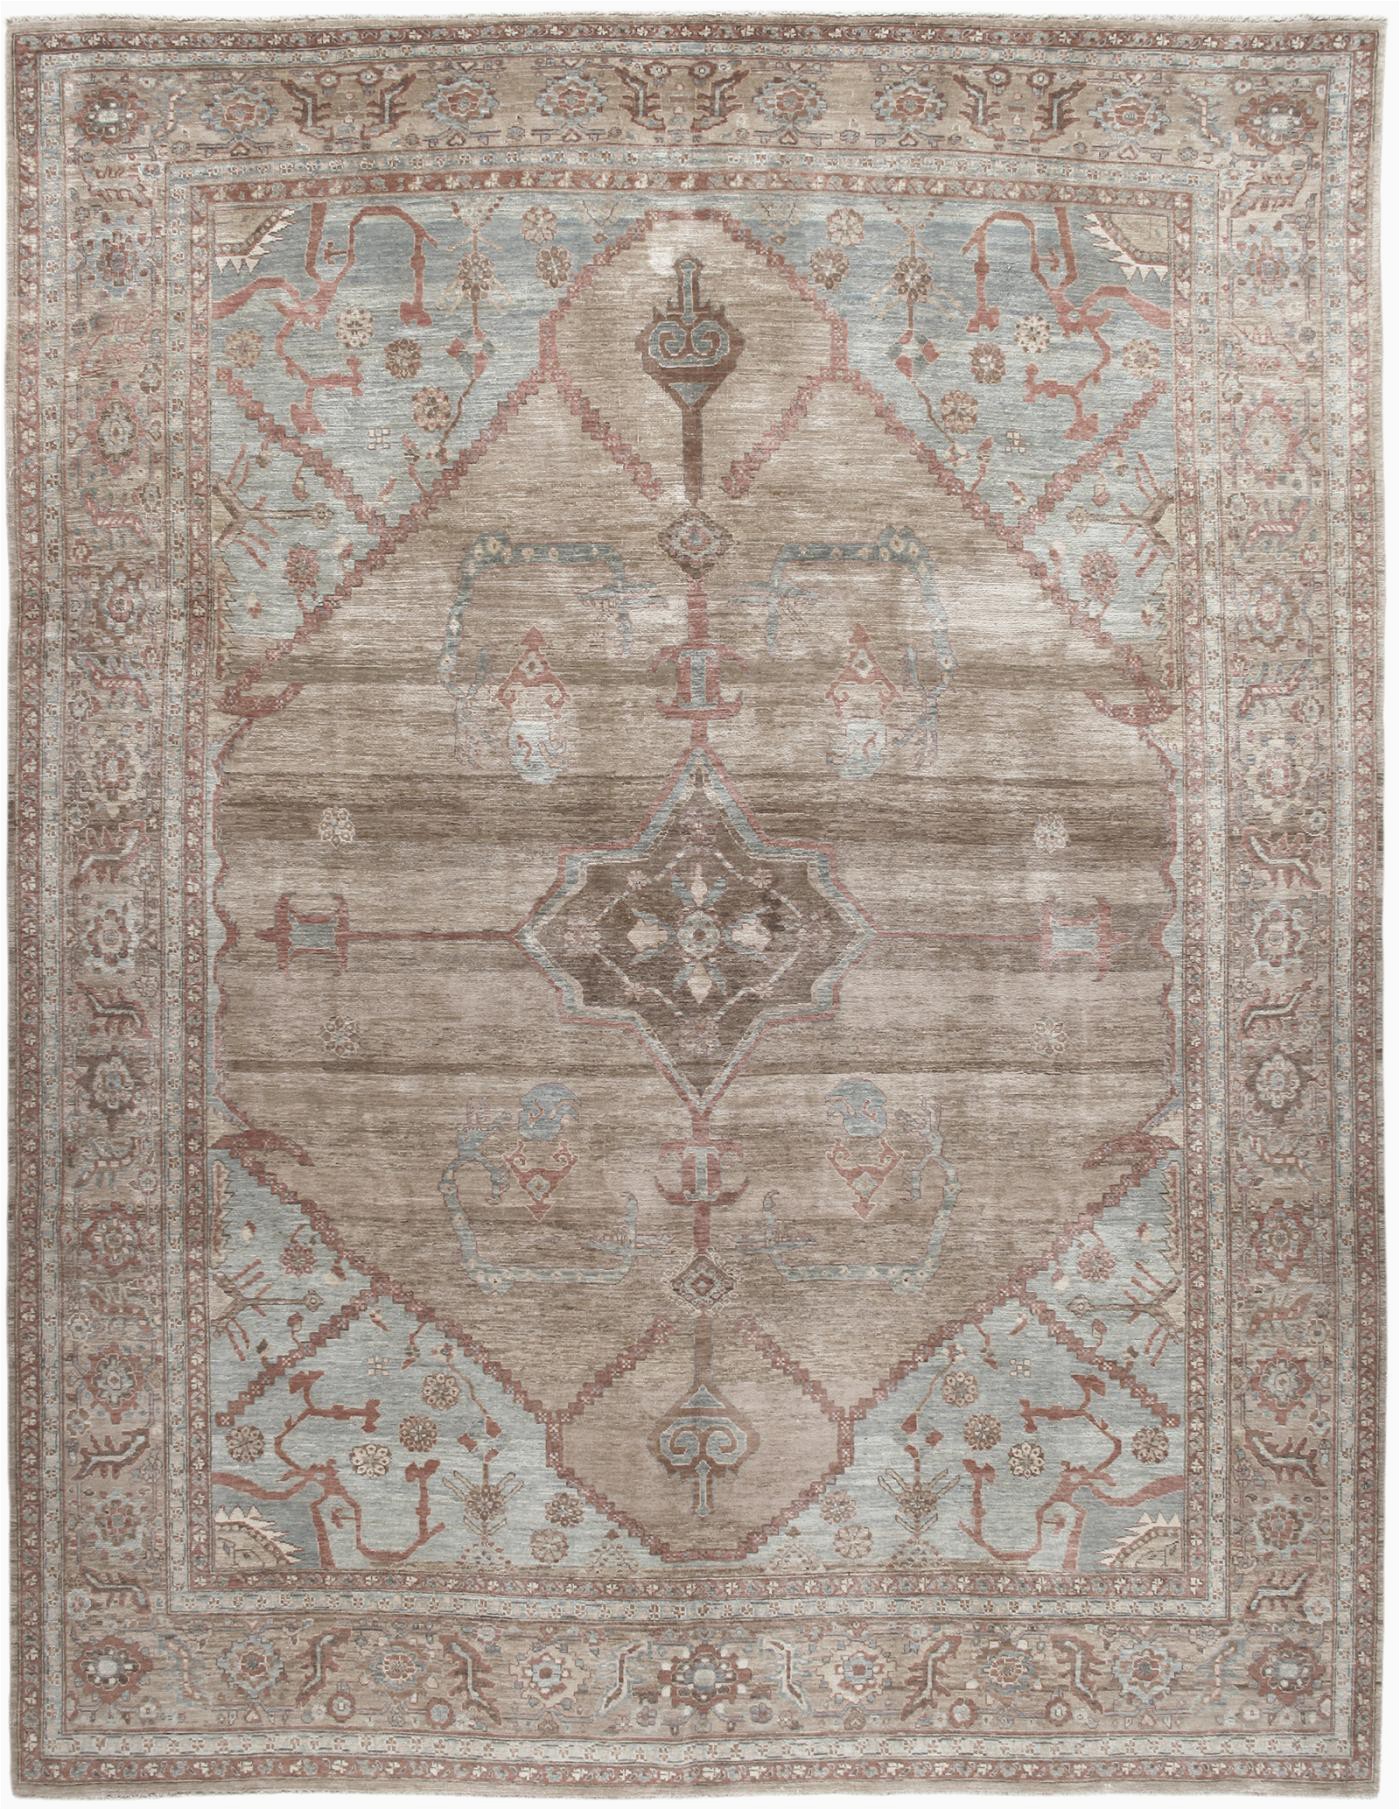 Pale Blue Persian Rug Nasiri Persian Traditional Bakshaish Handknotted Rug In Camel and Pale Blue Color